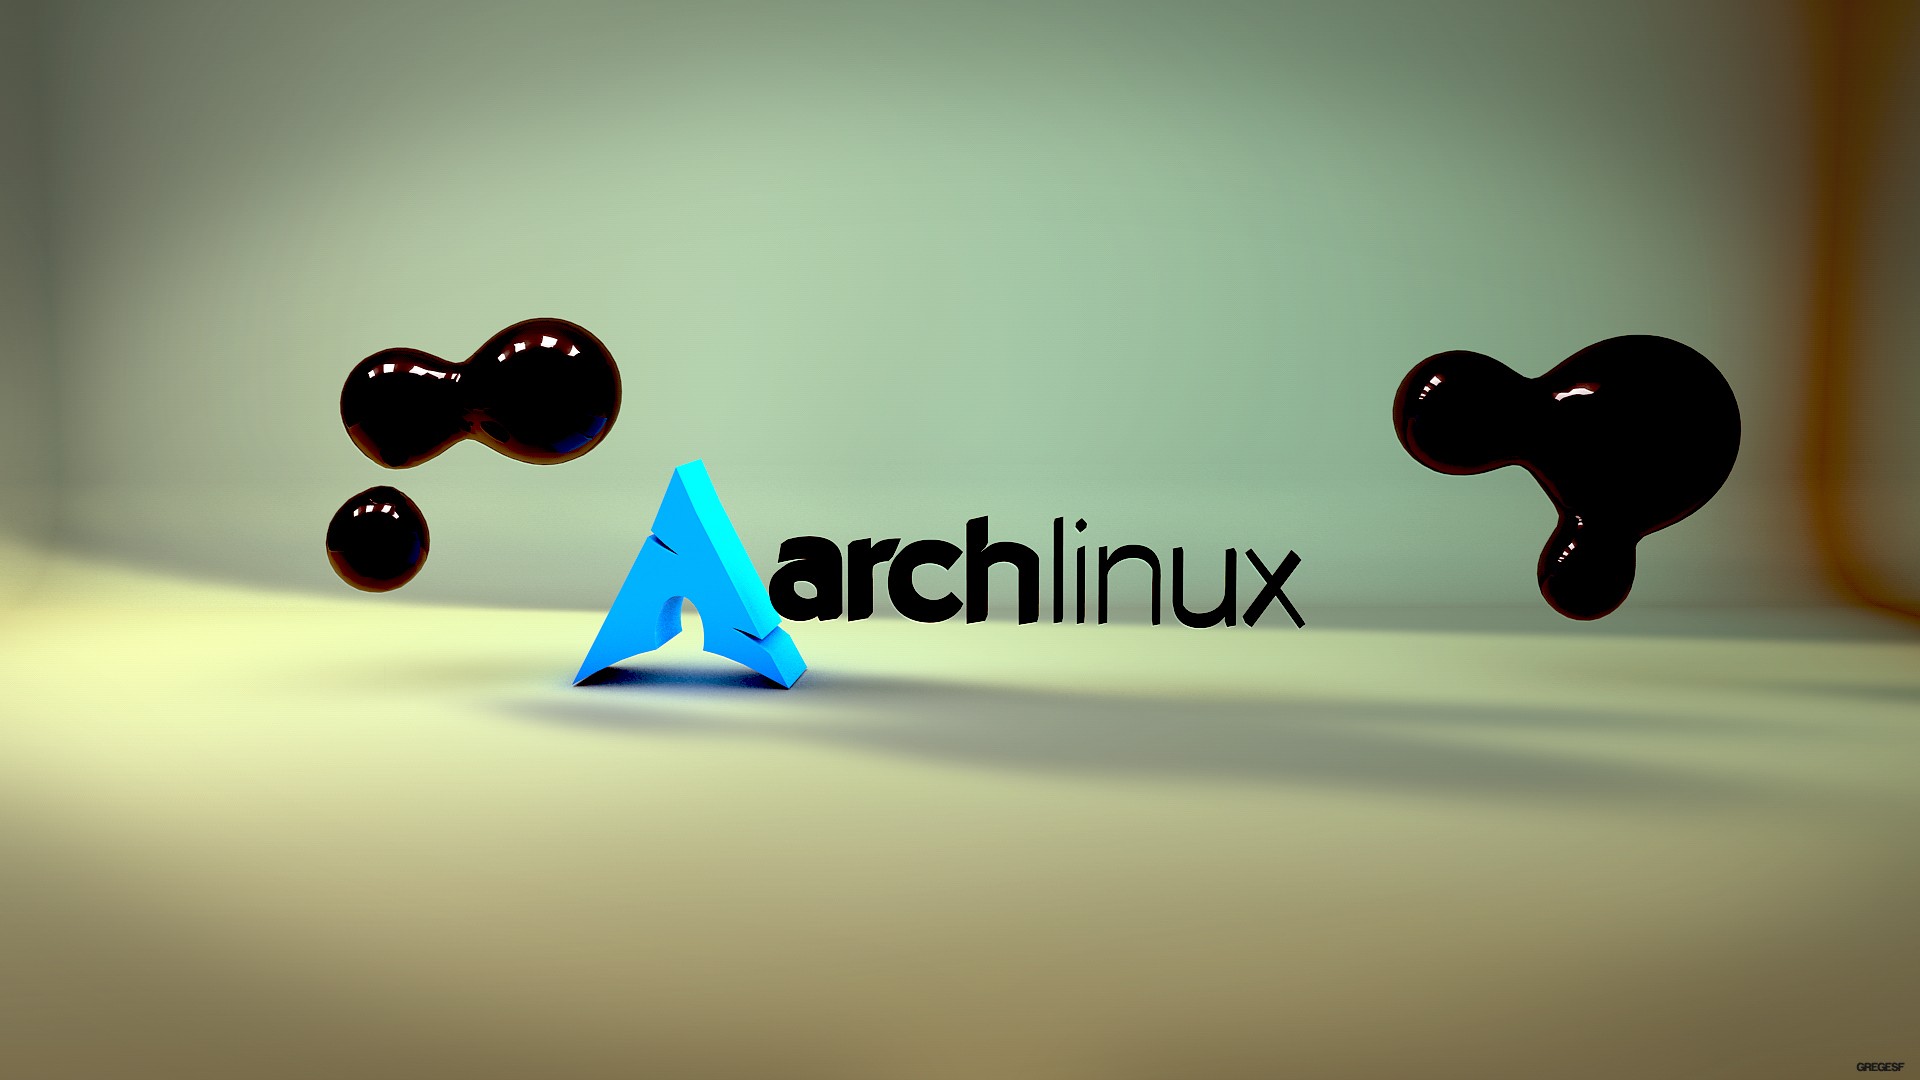 General 1920x1080 Linux Arch Linux open source operating system logo